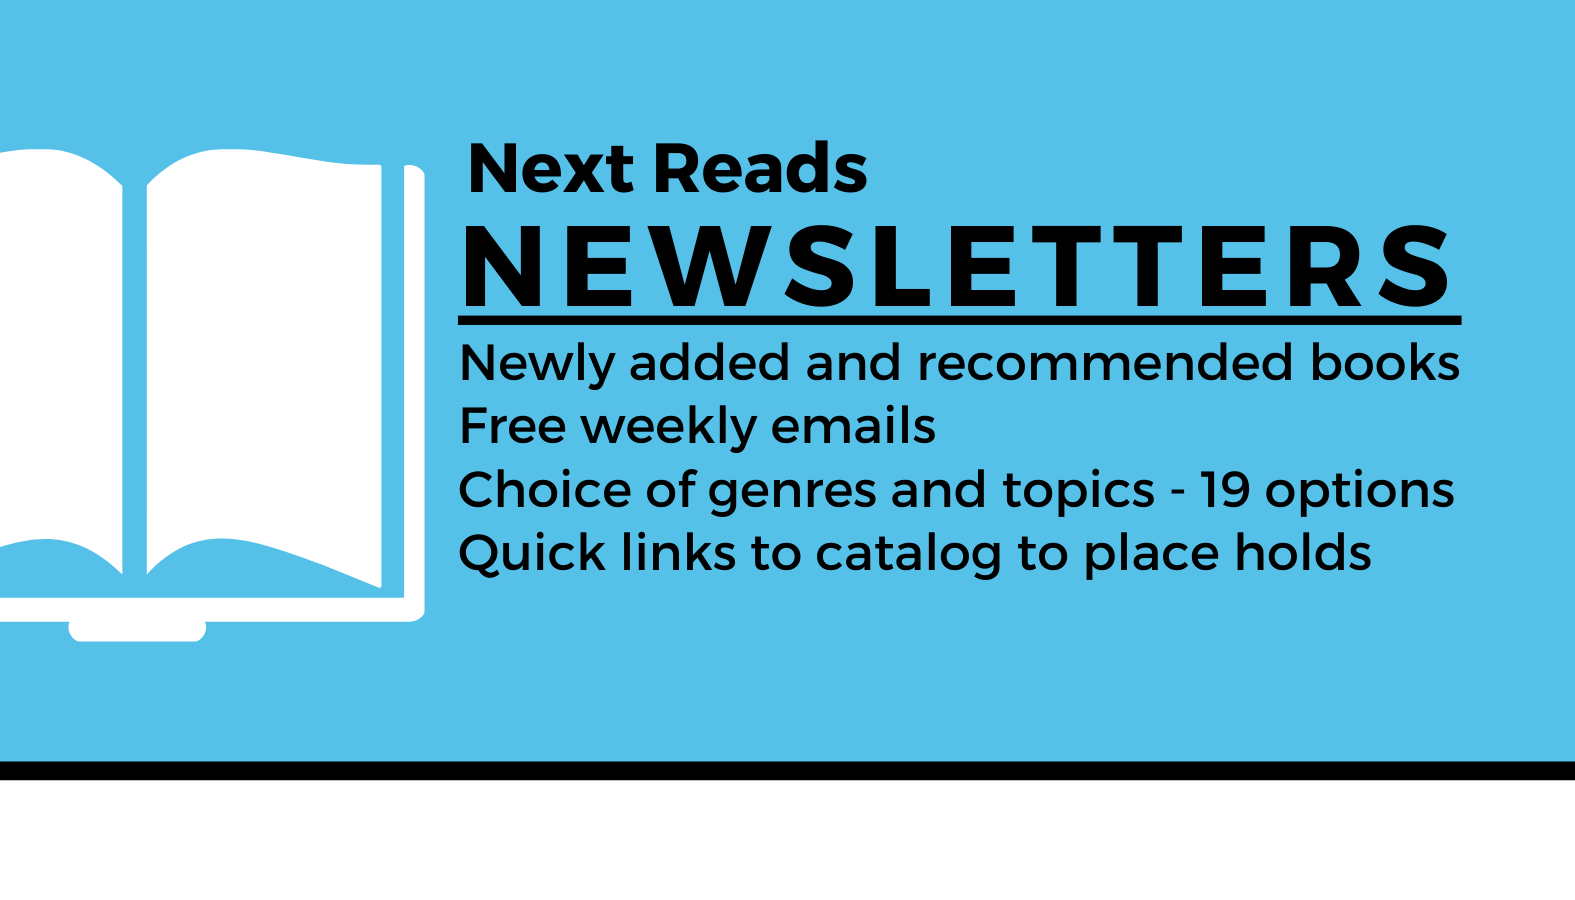 Button link to launch sign-up page for Next reads Newsletters. Text reads: Next Reads Newsletters Newly added and recommended books Free weekly emails Choice of genres and topics - 19 options Quick links to catalog to place holds